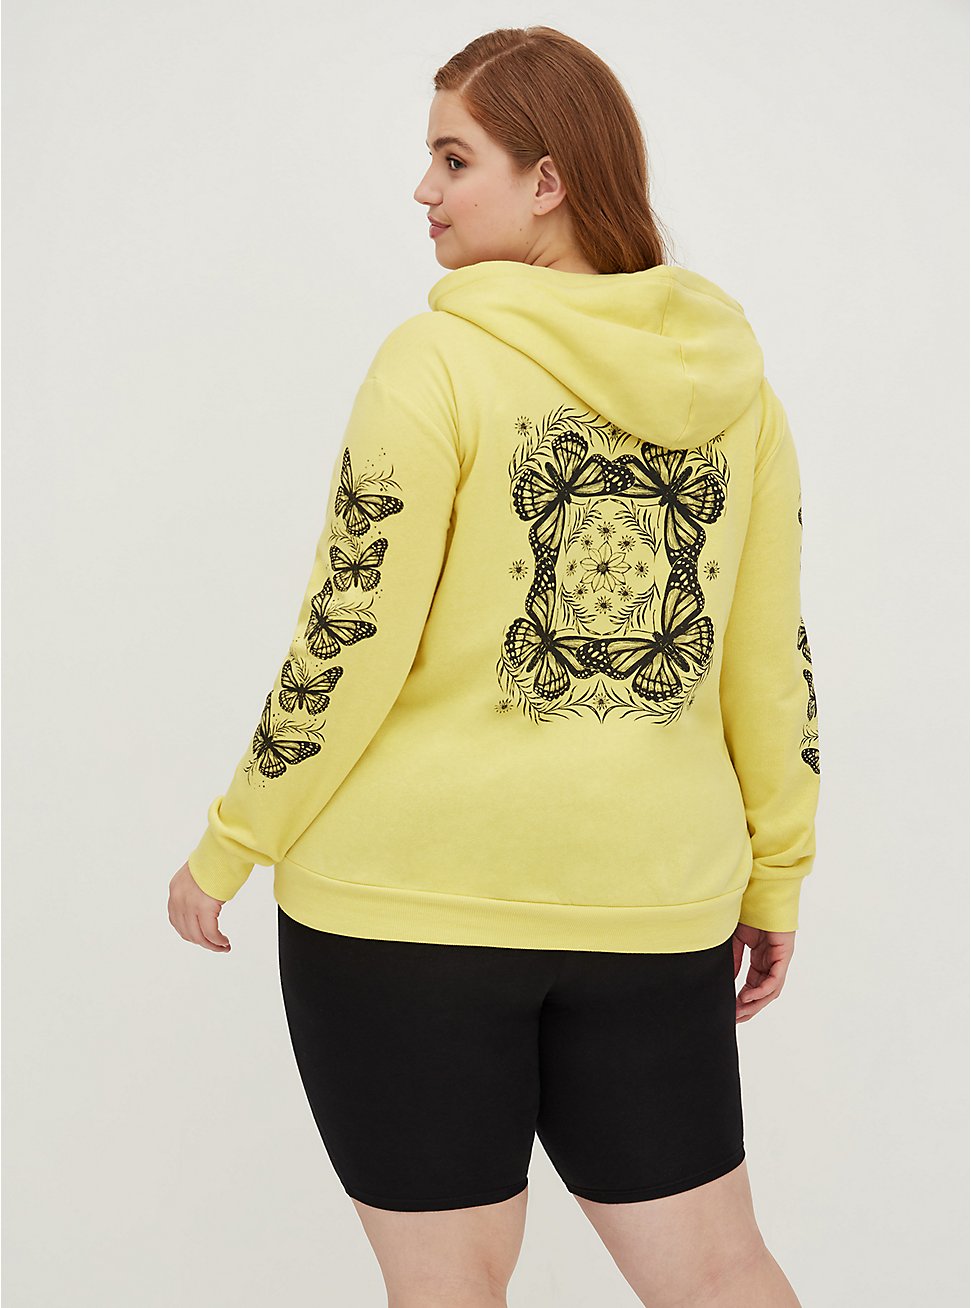 Lace-Up Hoodie - Cozy Fleece Butterfly Yellow, YELLOW, hi-res